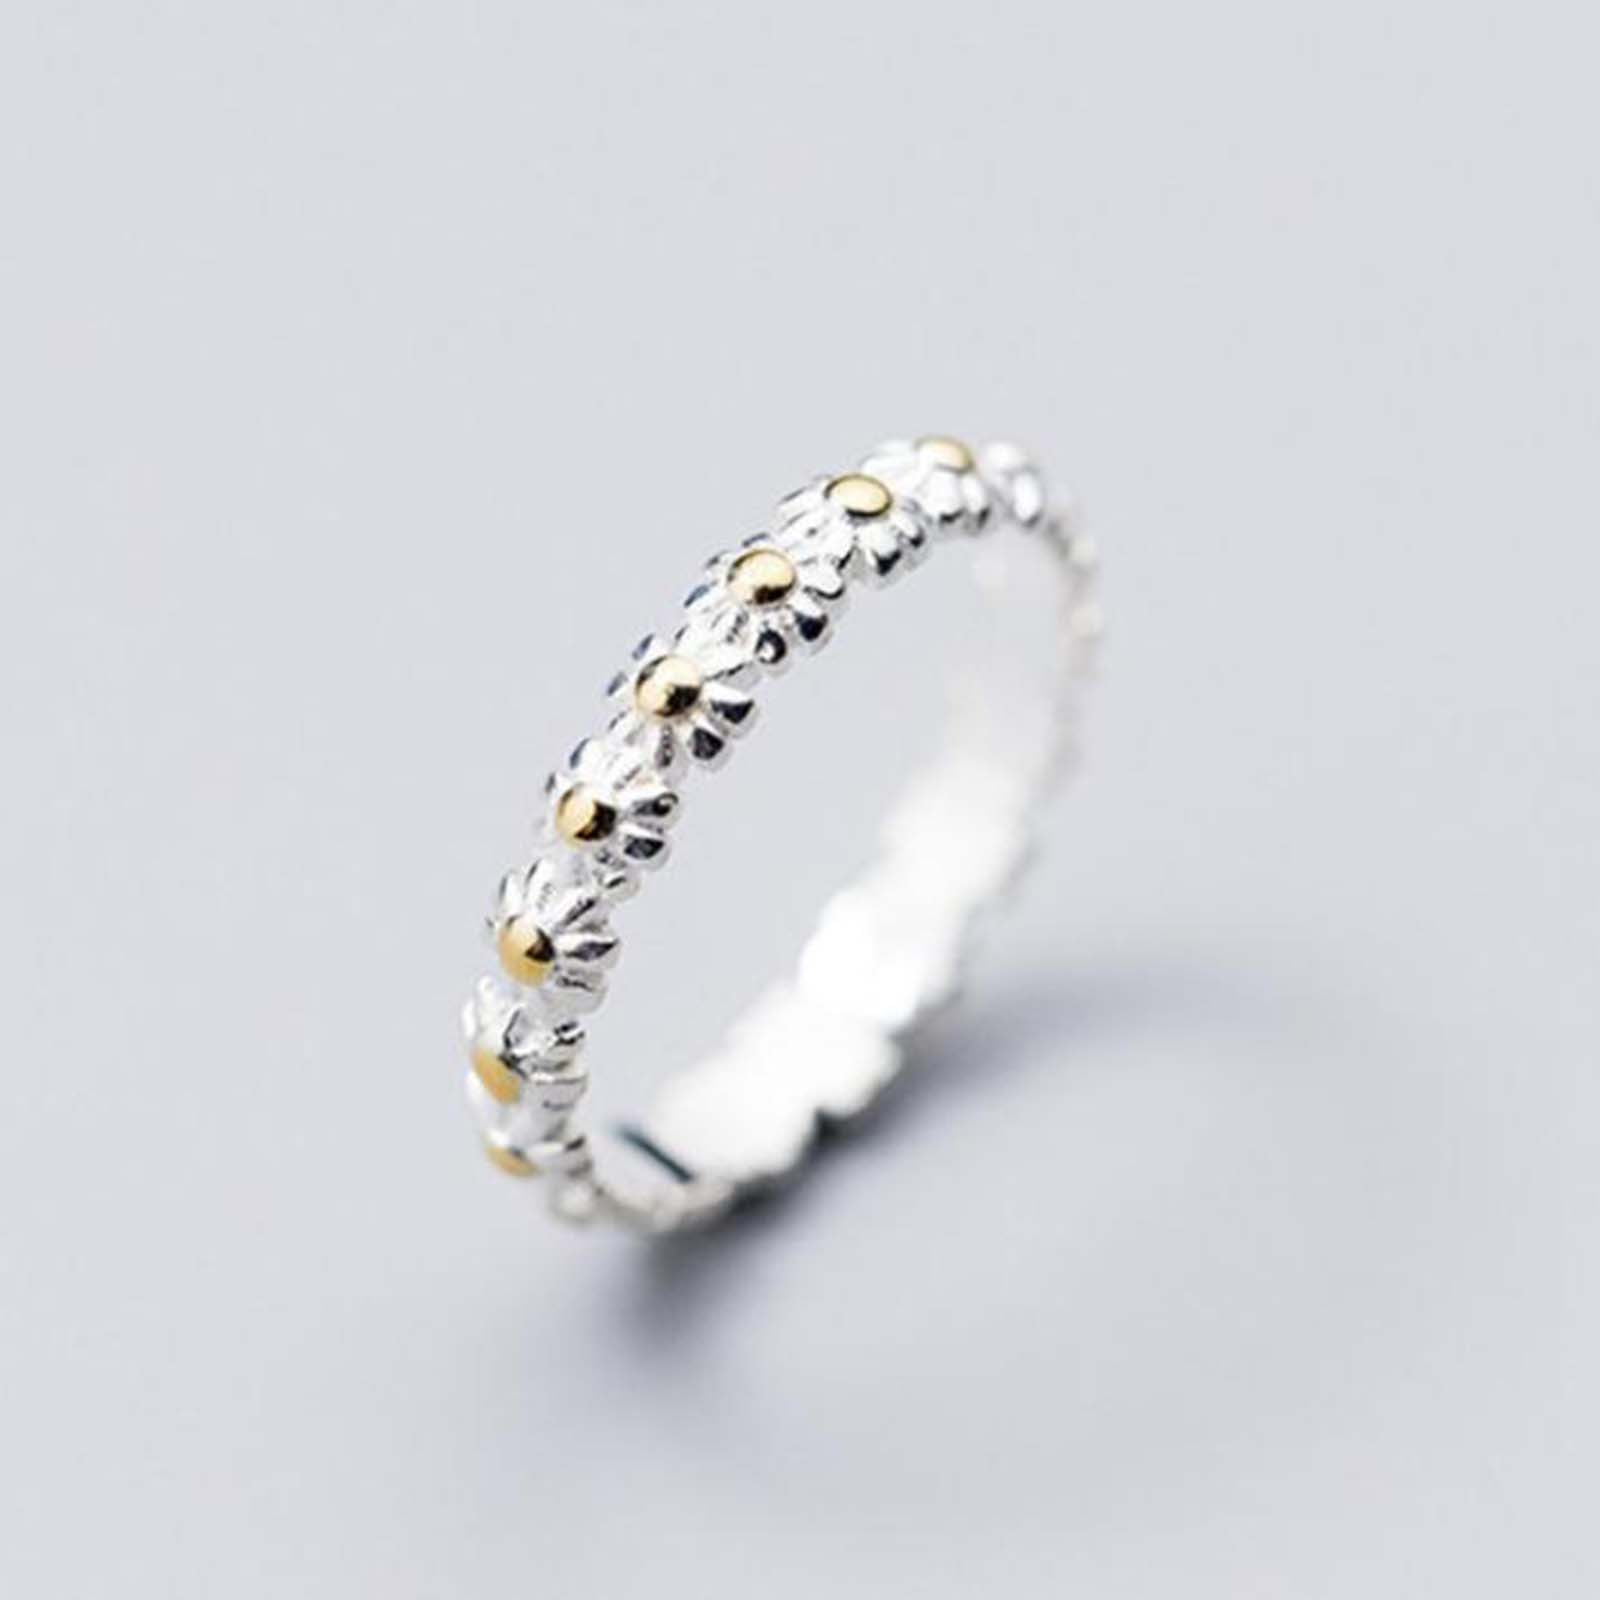 Gorgeous Silver Tone Daisy Flower Bead Stretch Thumb Finger Ring Bijoux Spring